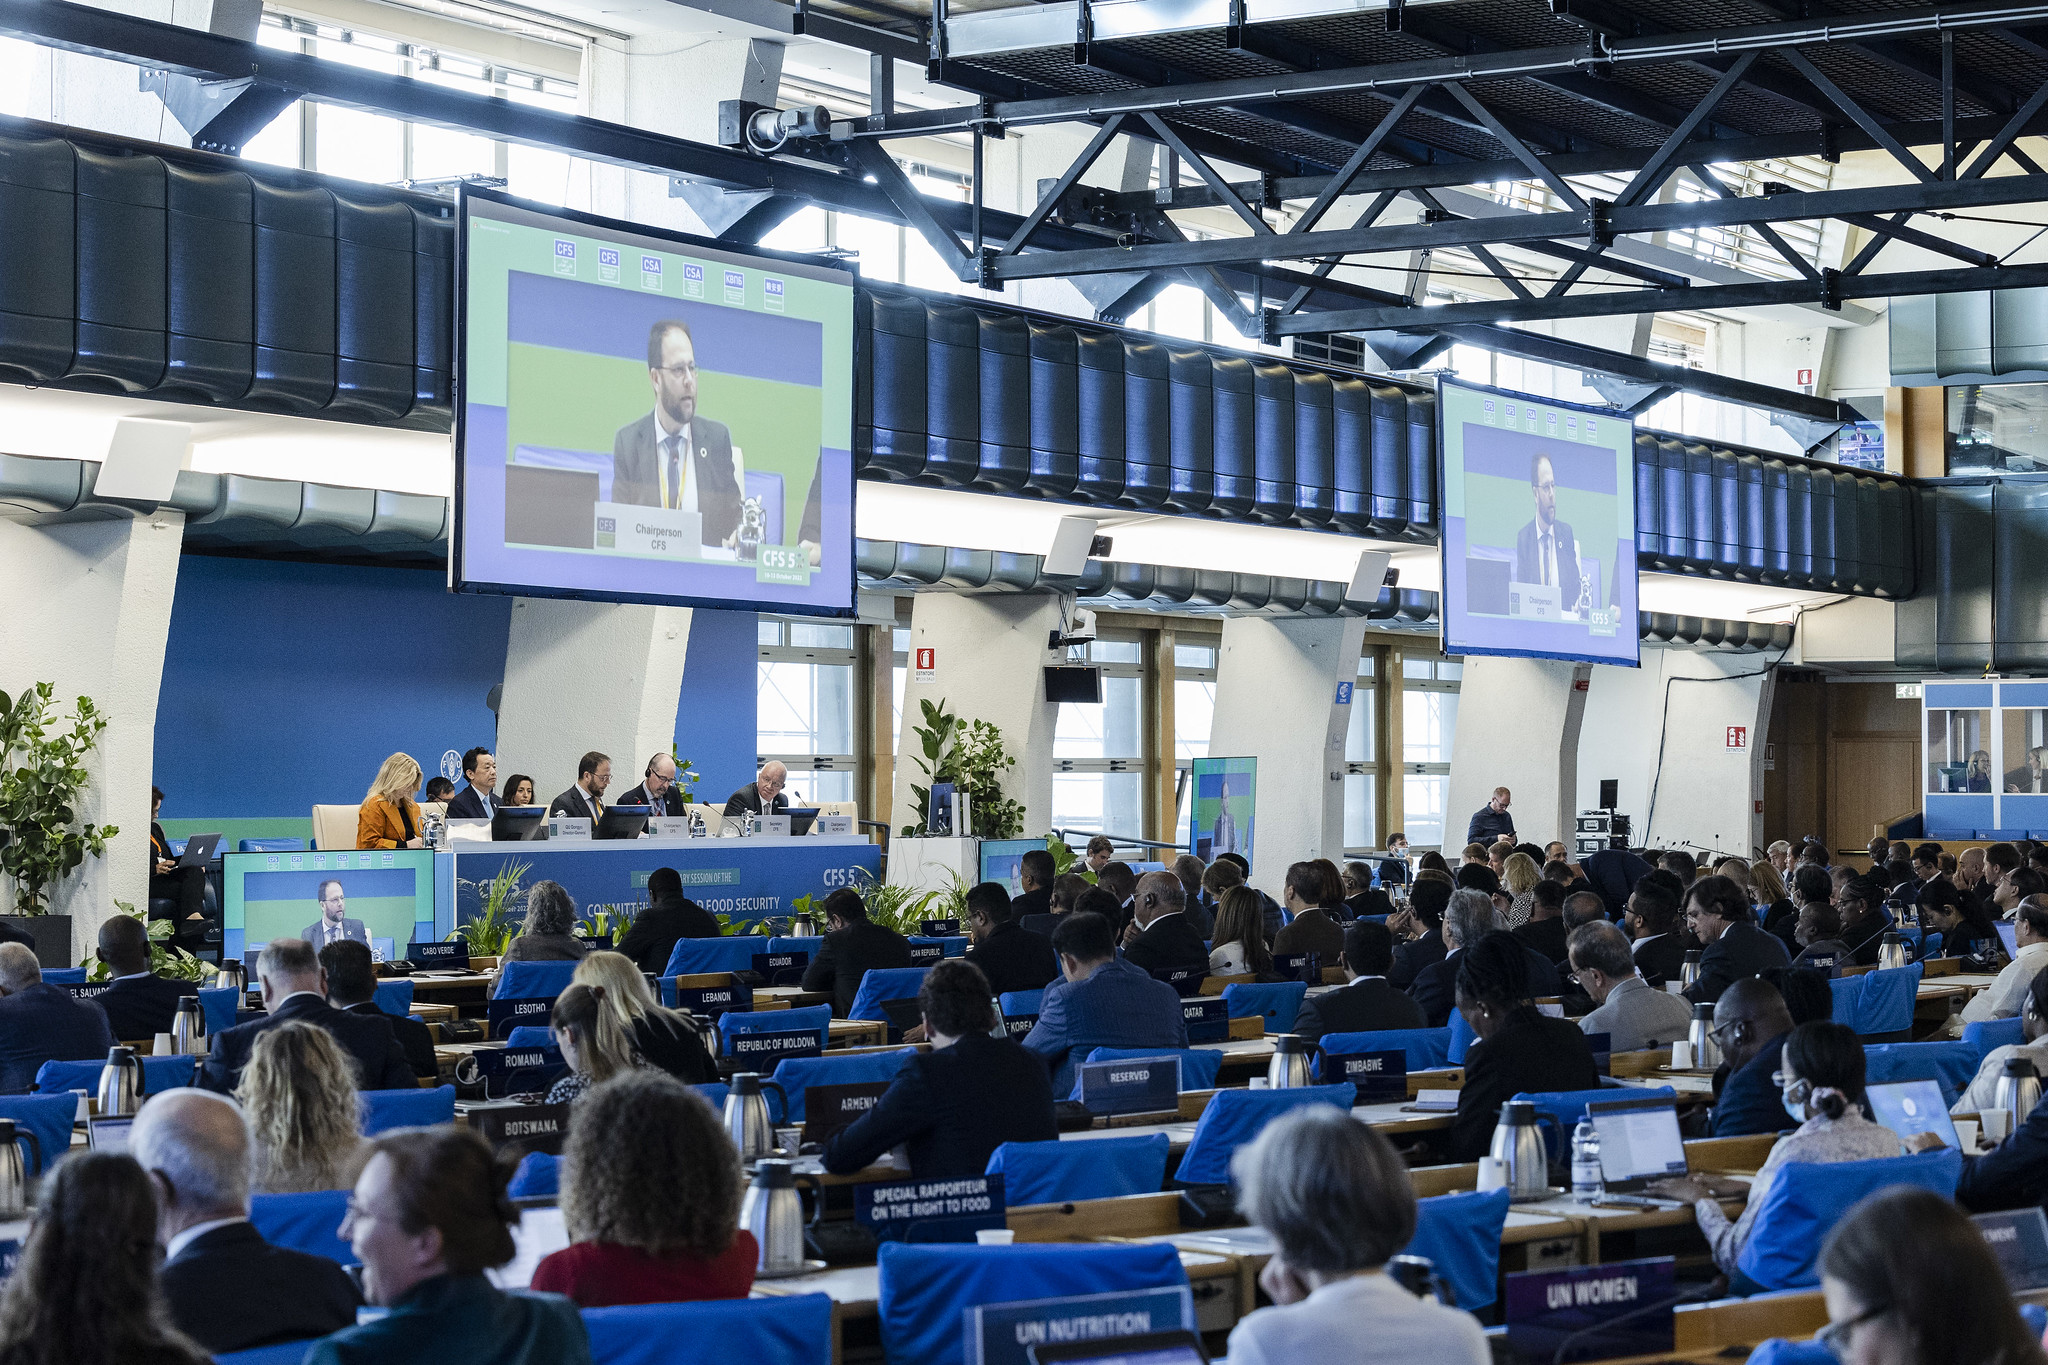 10 October 2022, Rome, Italy - Opening Session: Committee of World Food Security (CFS), 50th Session. FAO headquarters (Plenary Hall). Photo credit: ©FAO/Giuseppe Carotenuto. Editorial use only. Copyright ©FAO.